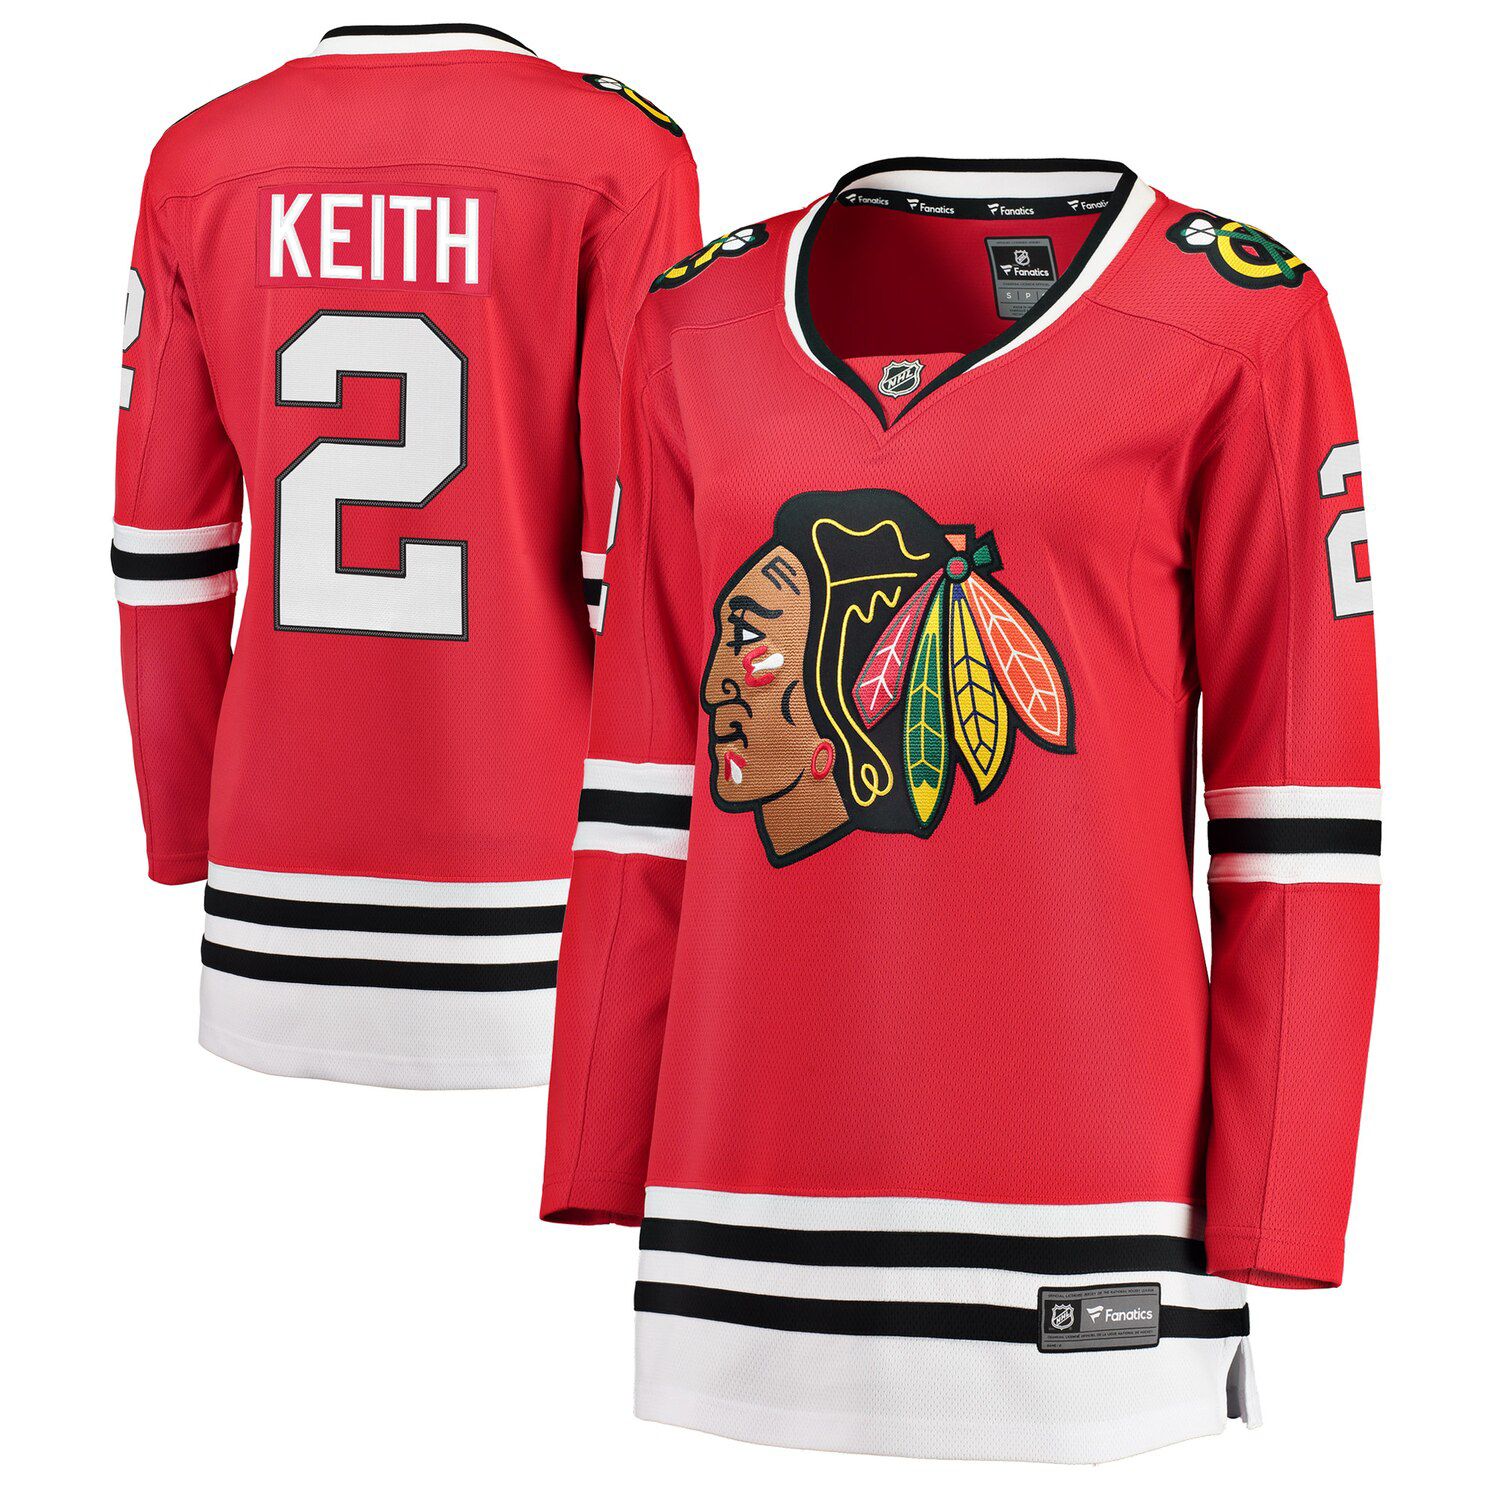 duncan keith red jersey